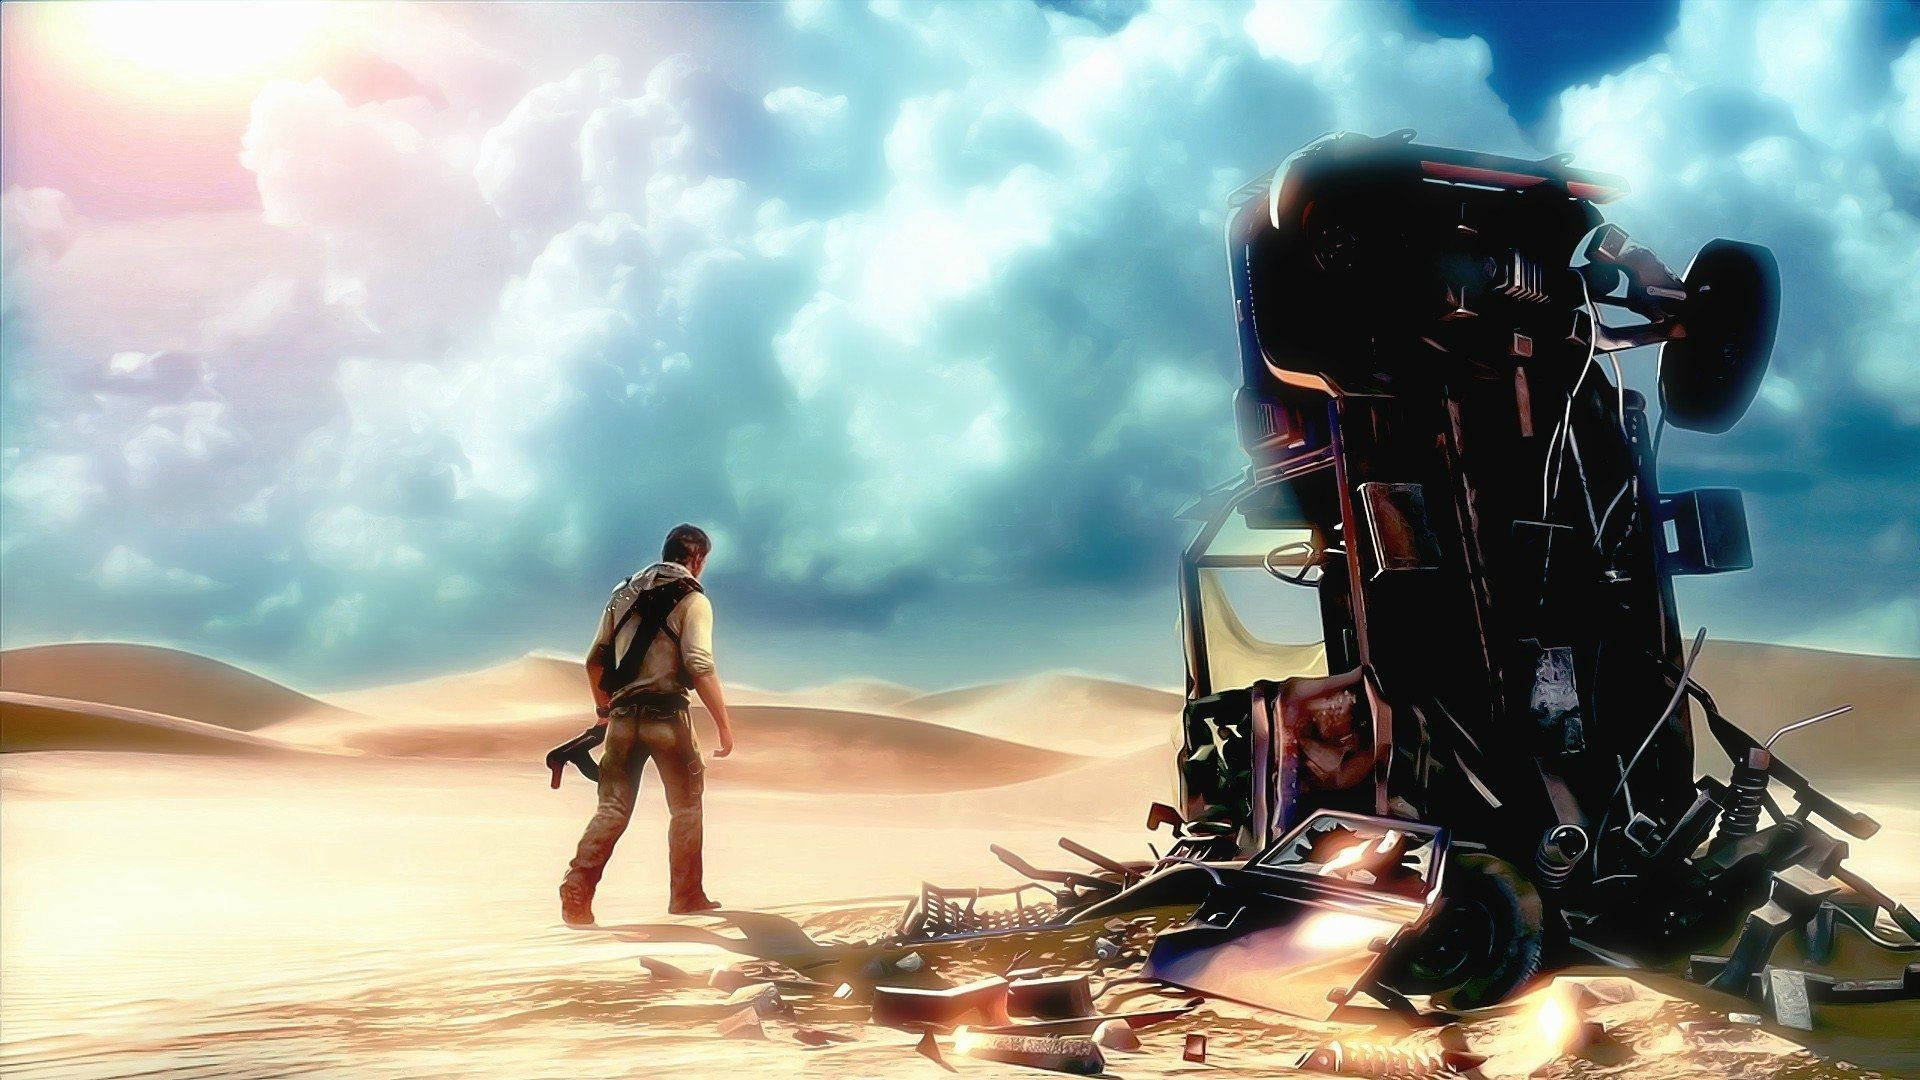 Uncharted's Protagonist Nathan Drake next to a crashed car. Wallpaper